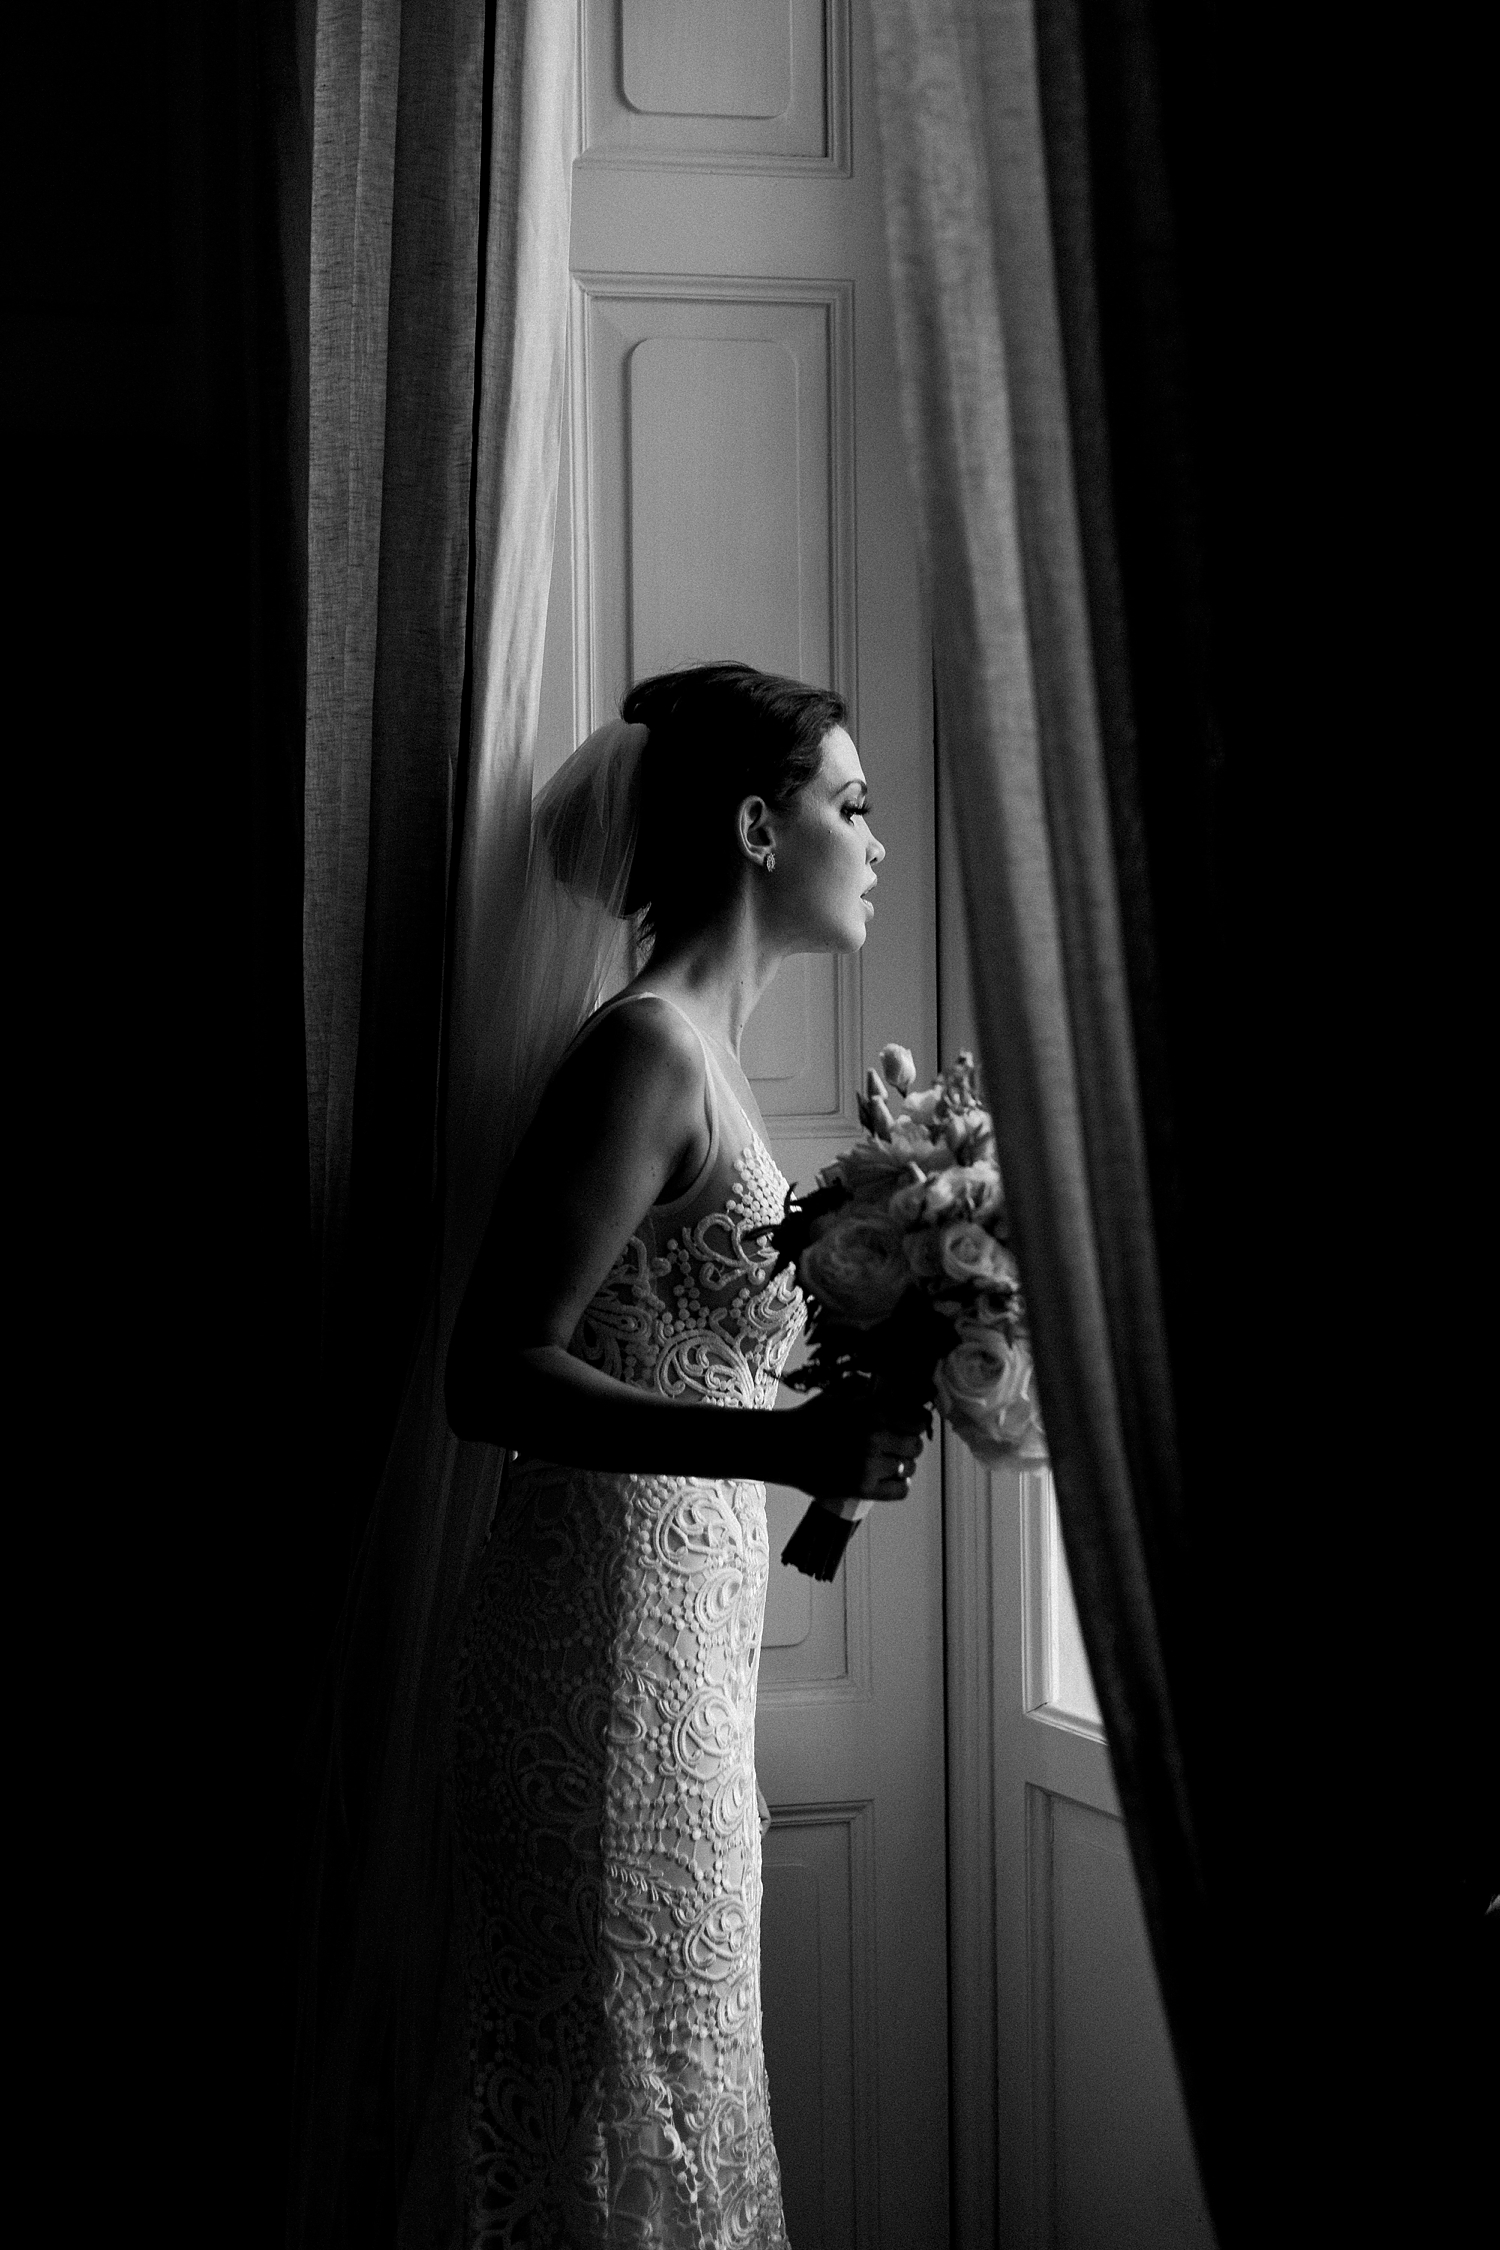 Bride holding floral bouquet in white lace wedding dress by window black and white